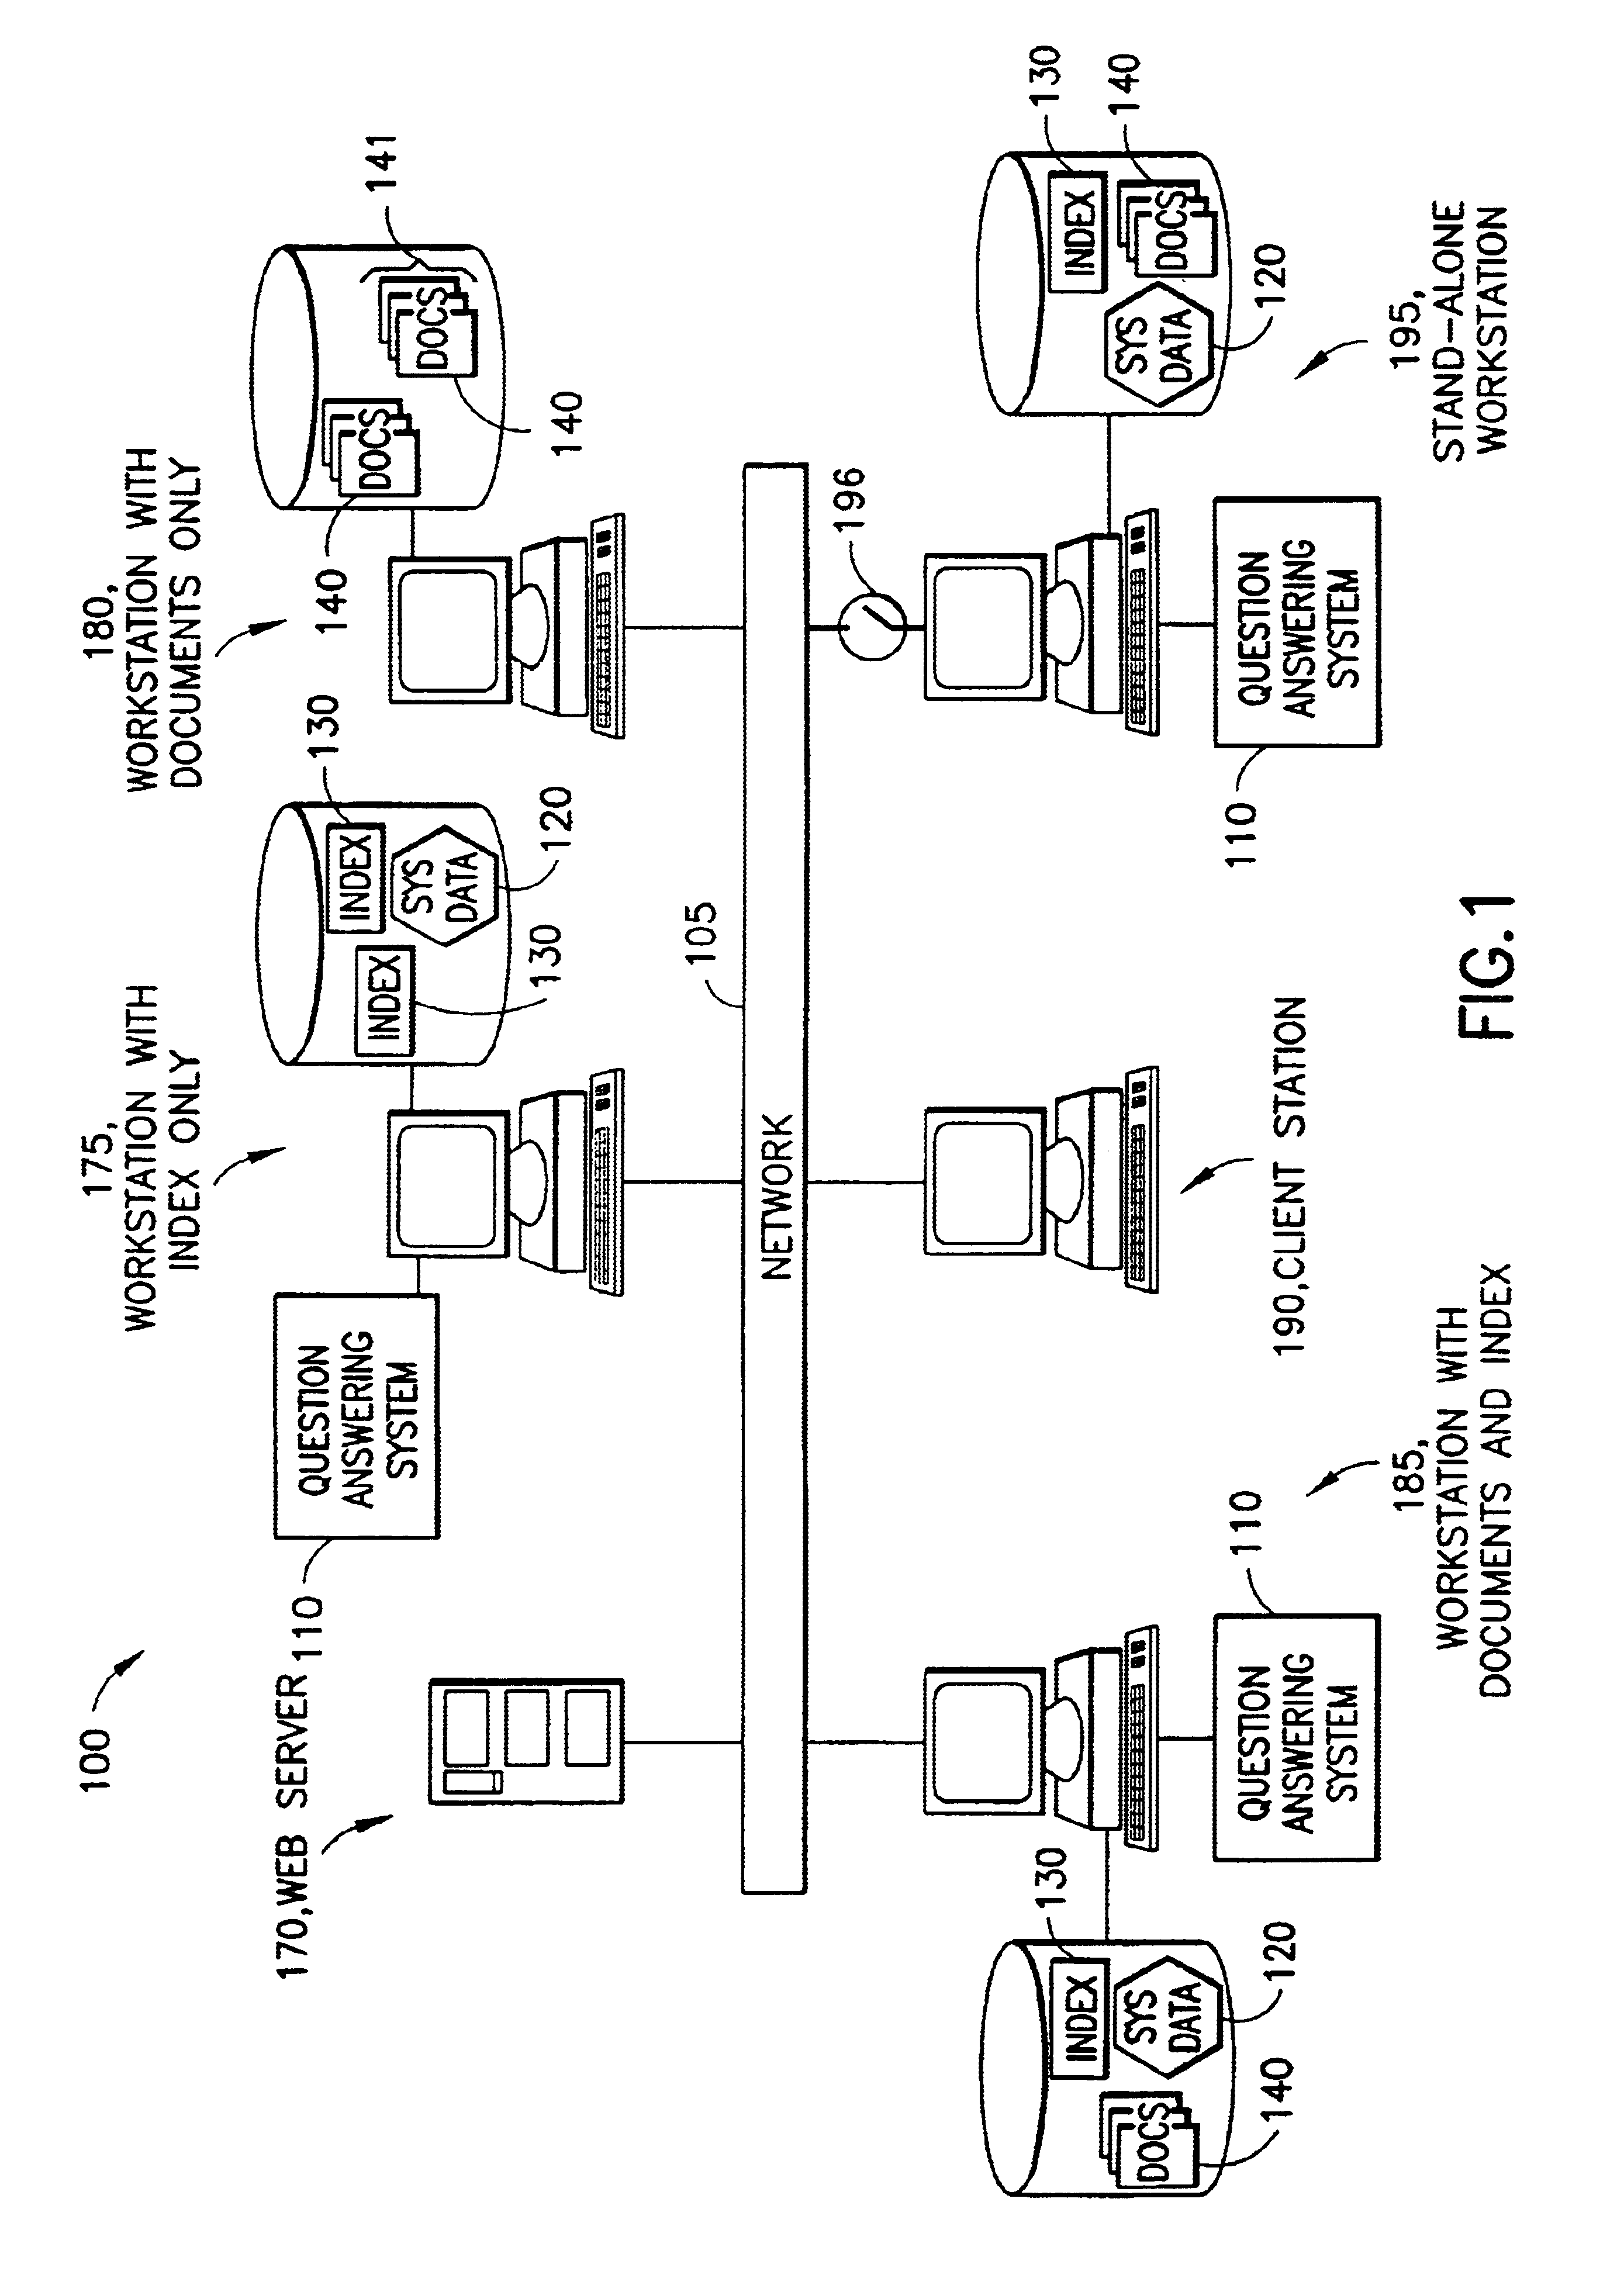 System, method and program product for answering questions using a search engine